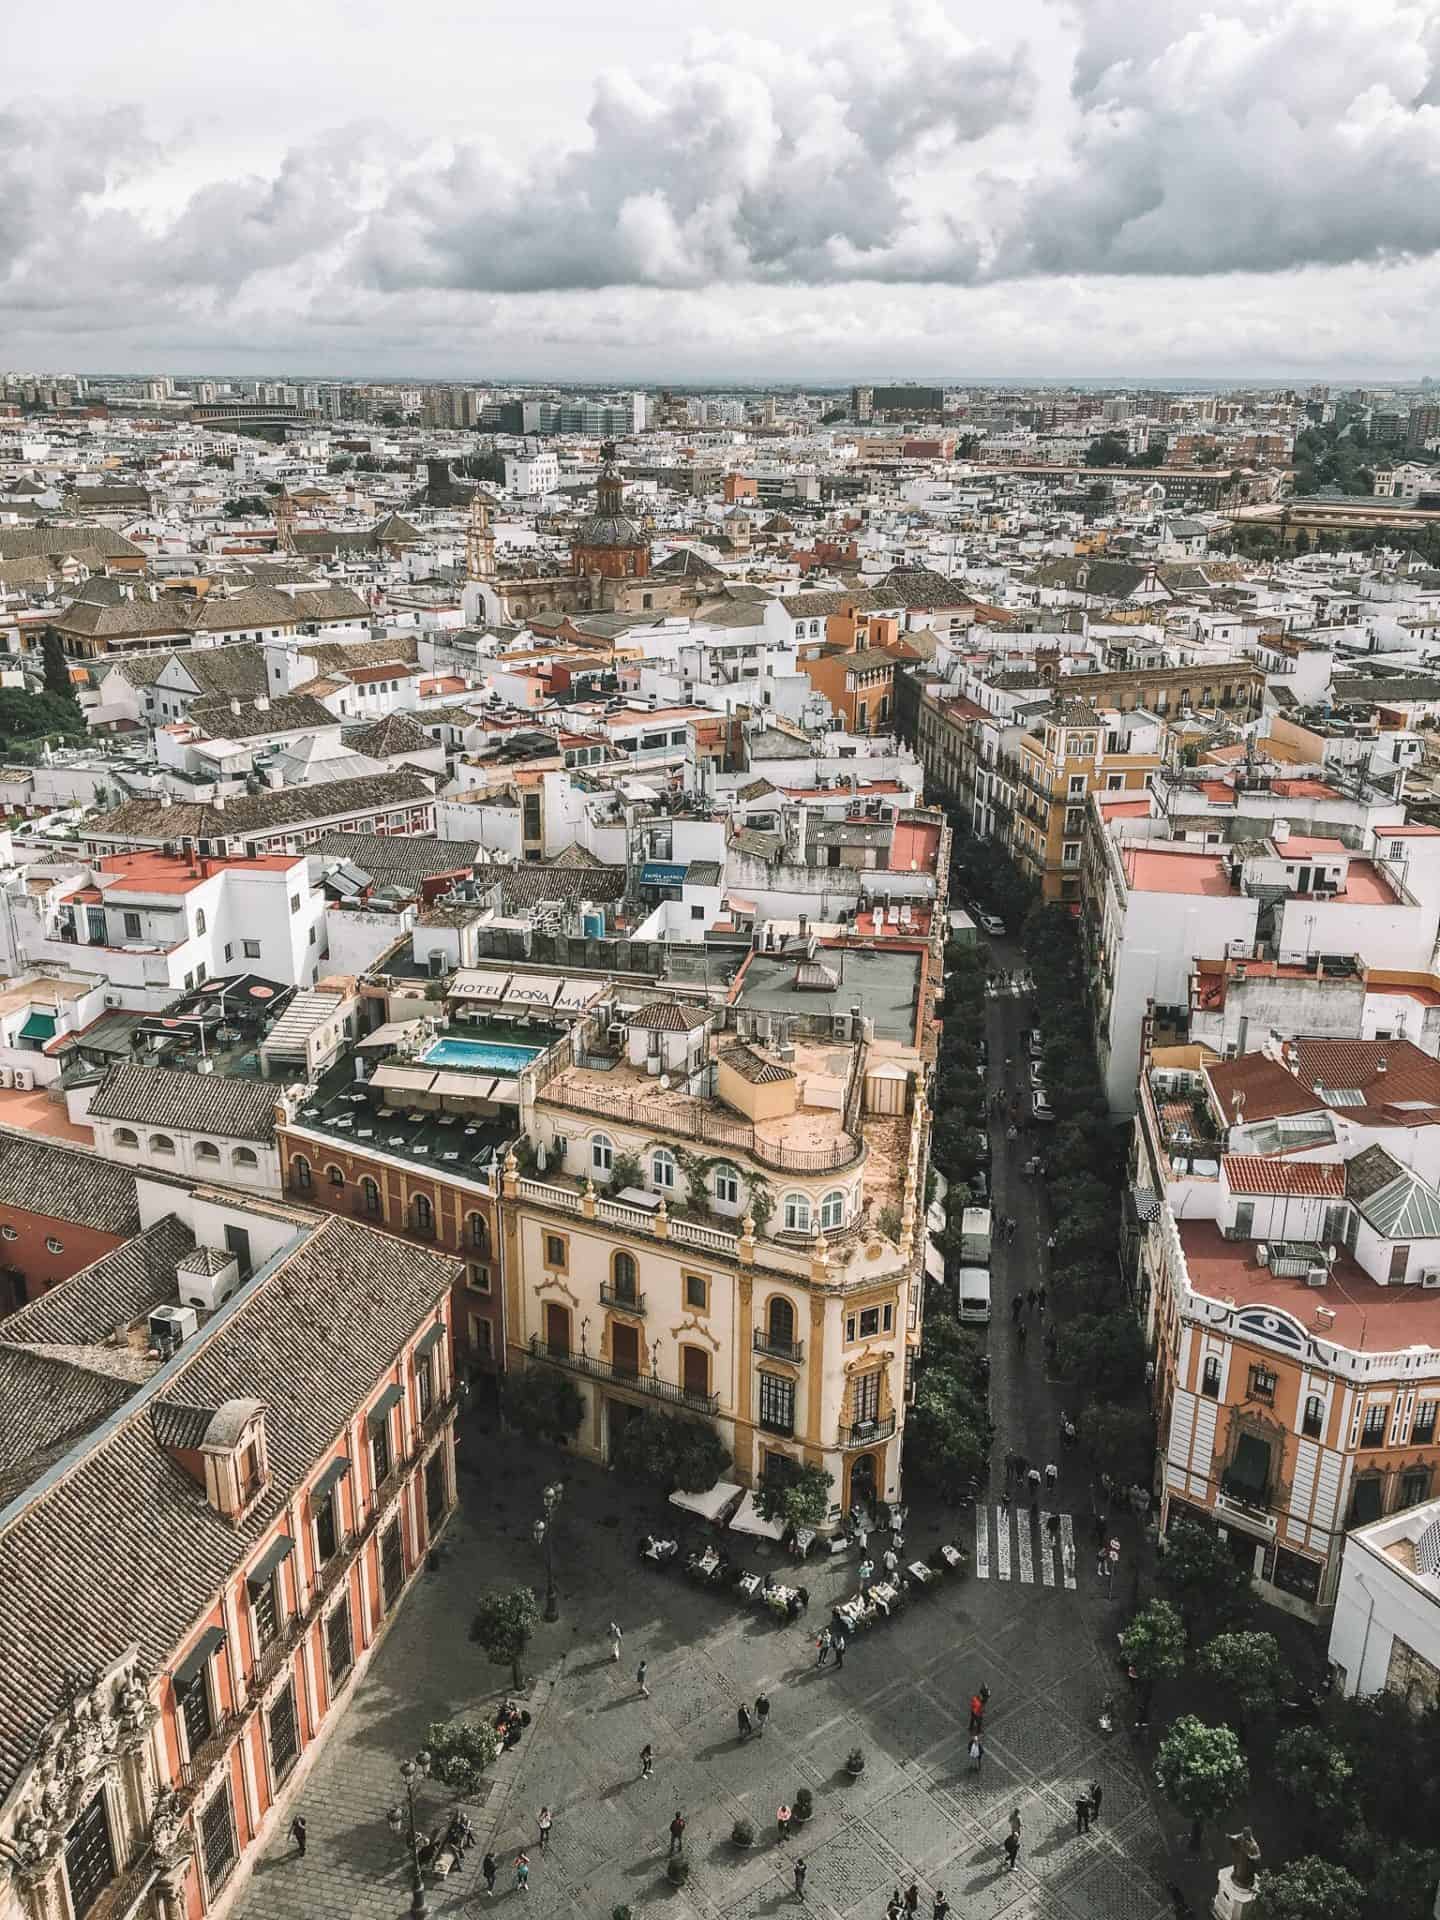 View of the city of Seville from above.